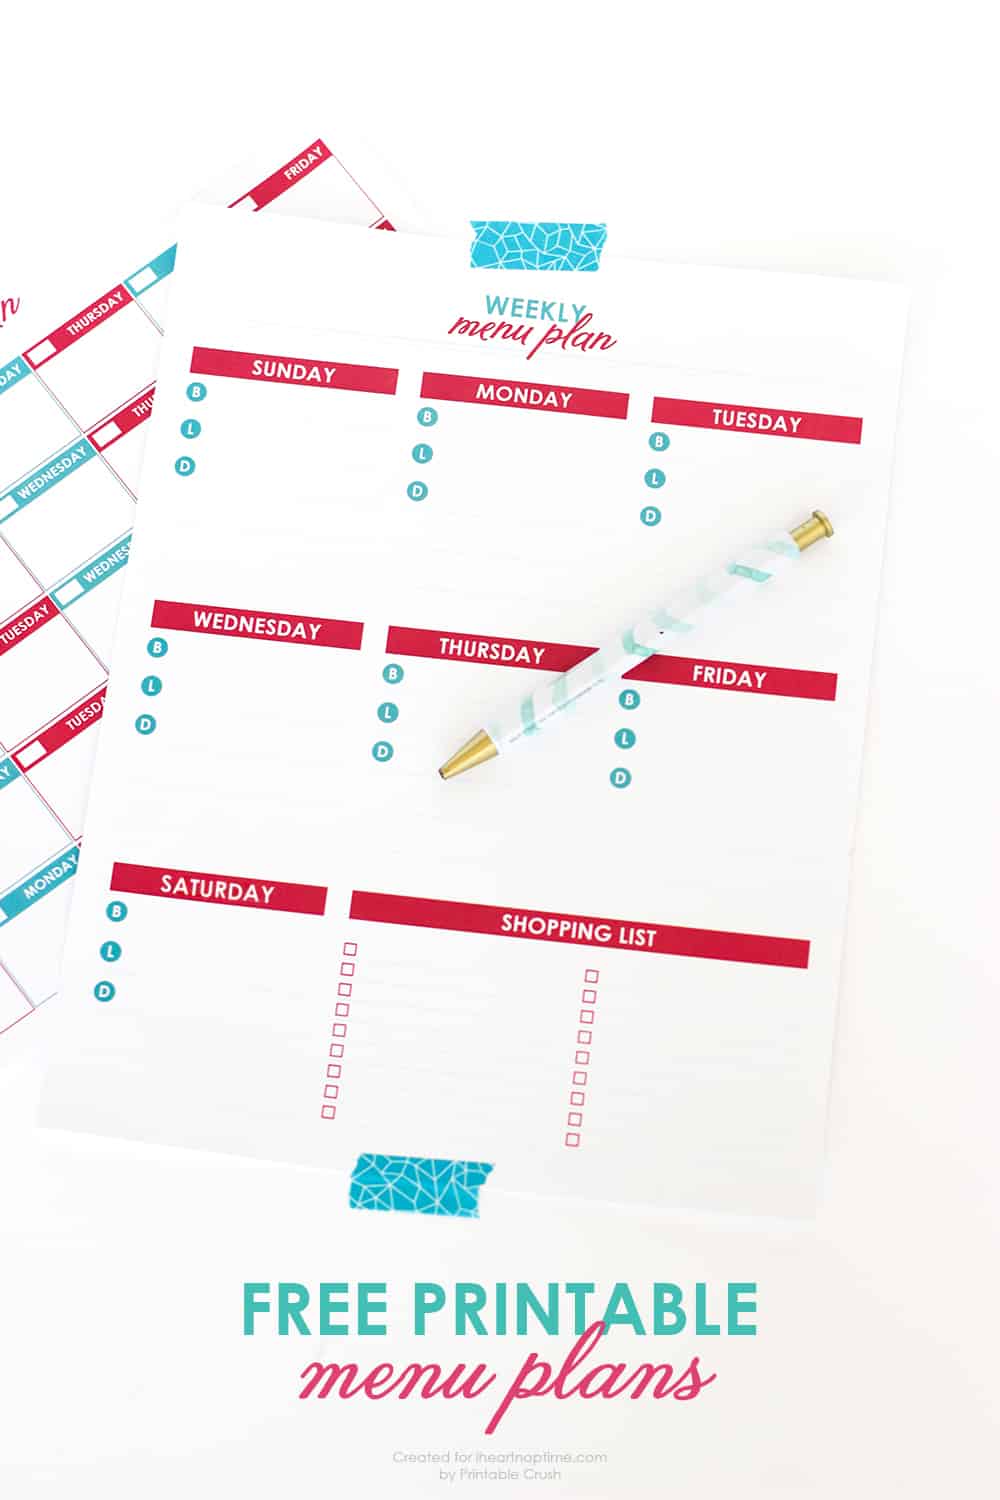 Menu Planning is a great way to organize your week